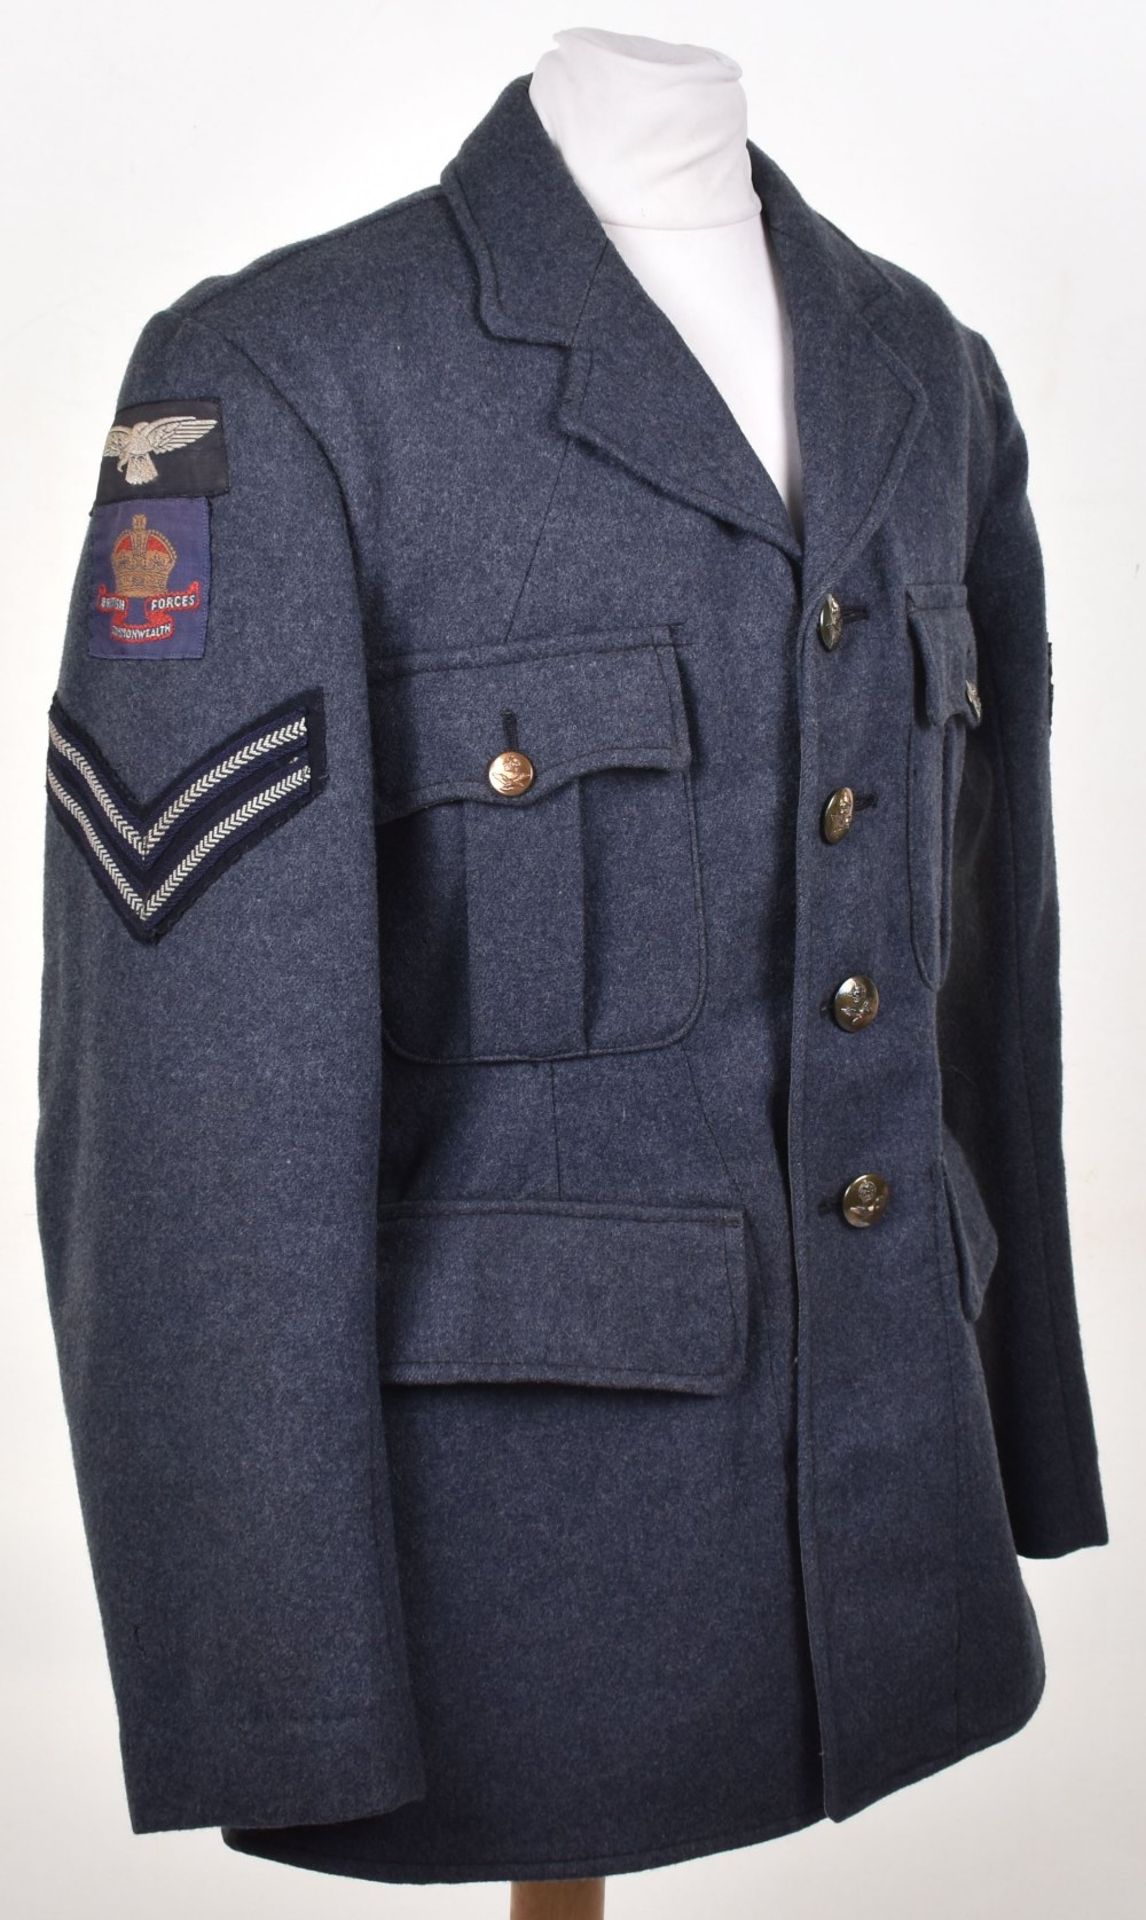 Scarce Royal Air Force Other Ranks Tunic with Insignia for British Commonwealth Occupation Force Jap